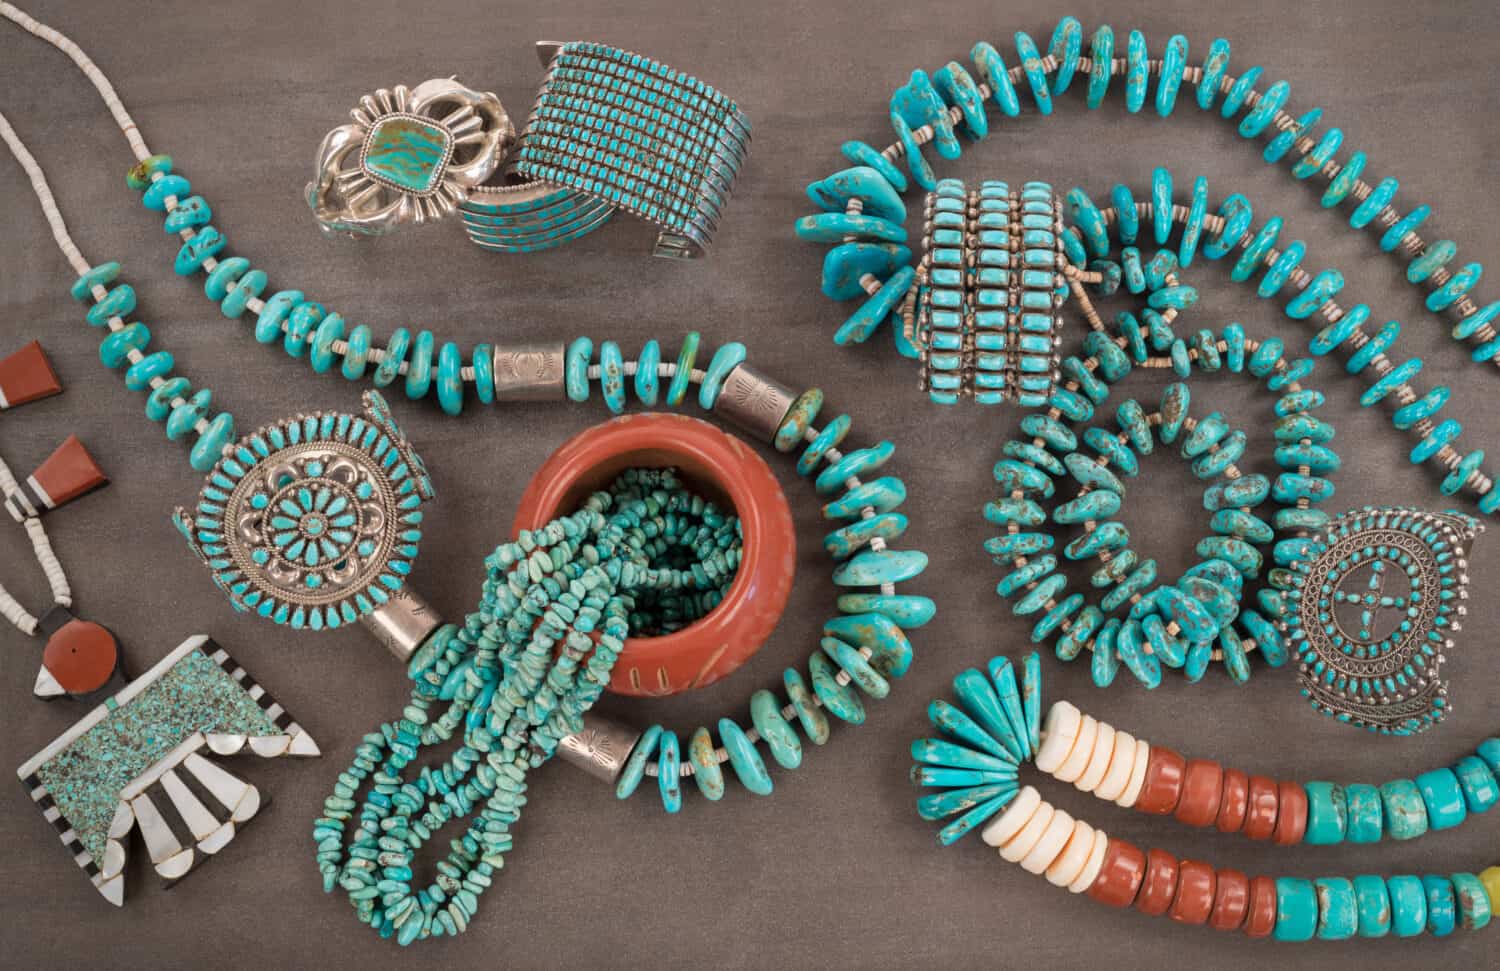 A collection of Native American Jewelry.A Santo Domingo Depression Era� Necklace, and Turquoise "Nugget" with silver beads, and Zuni and Navajo "Cuff" Bracelets, on a Grey Slate Background.